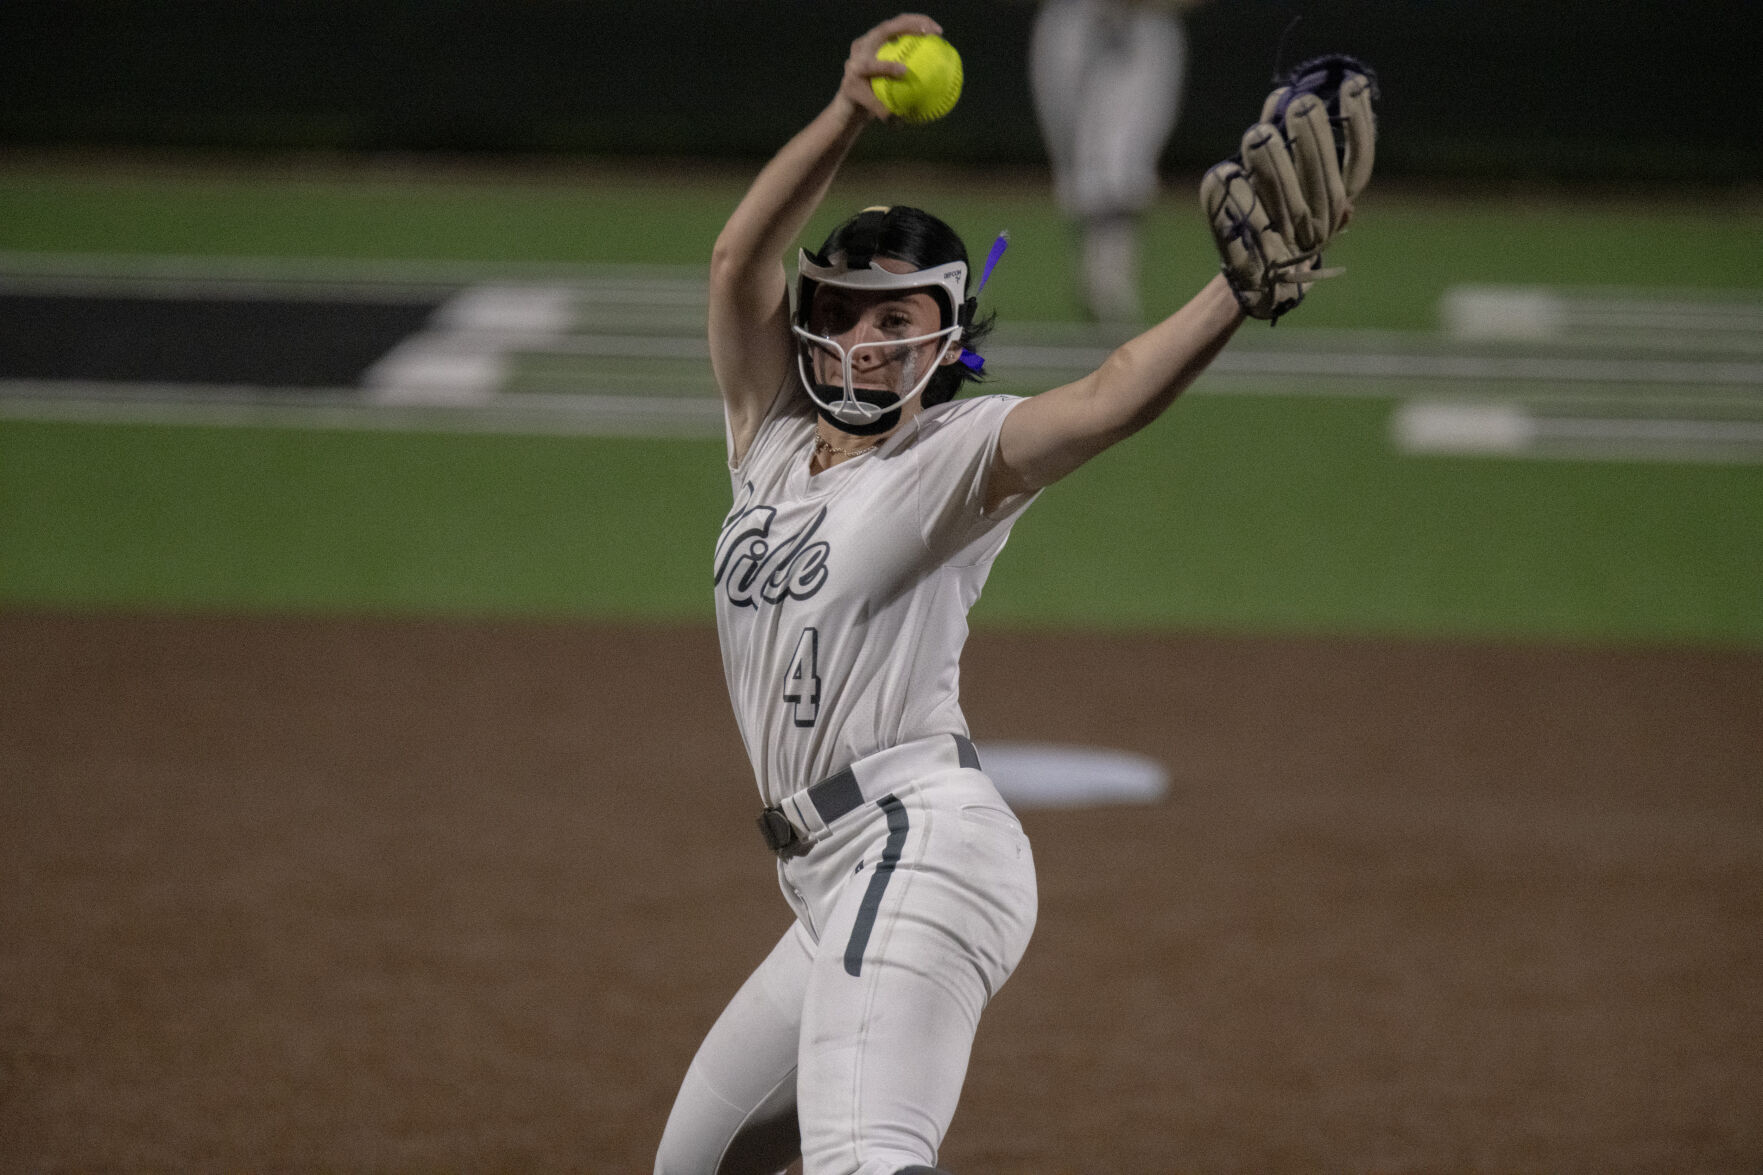 Huntsville Lady Hornets dominate Hudson 9-0 in home opener with strong sixth inning surge